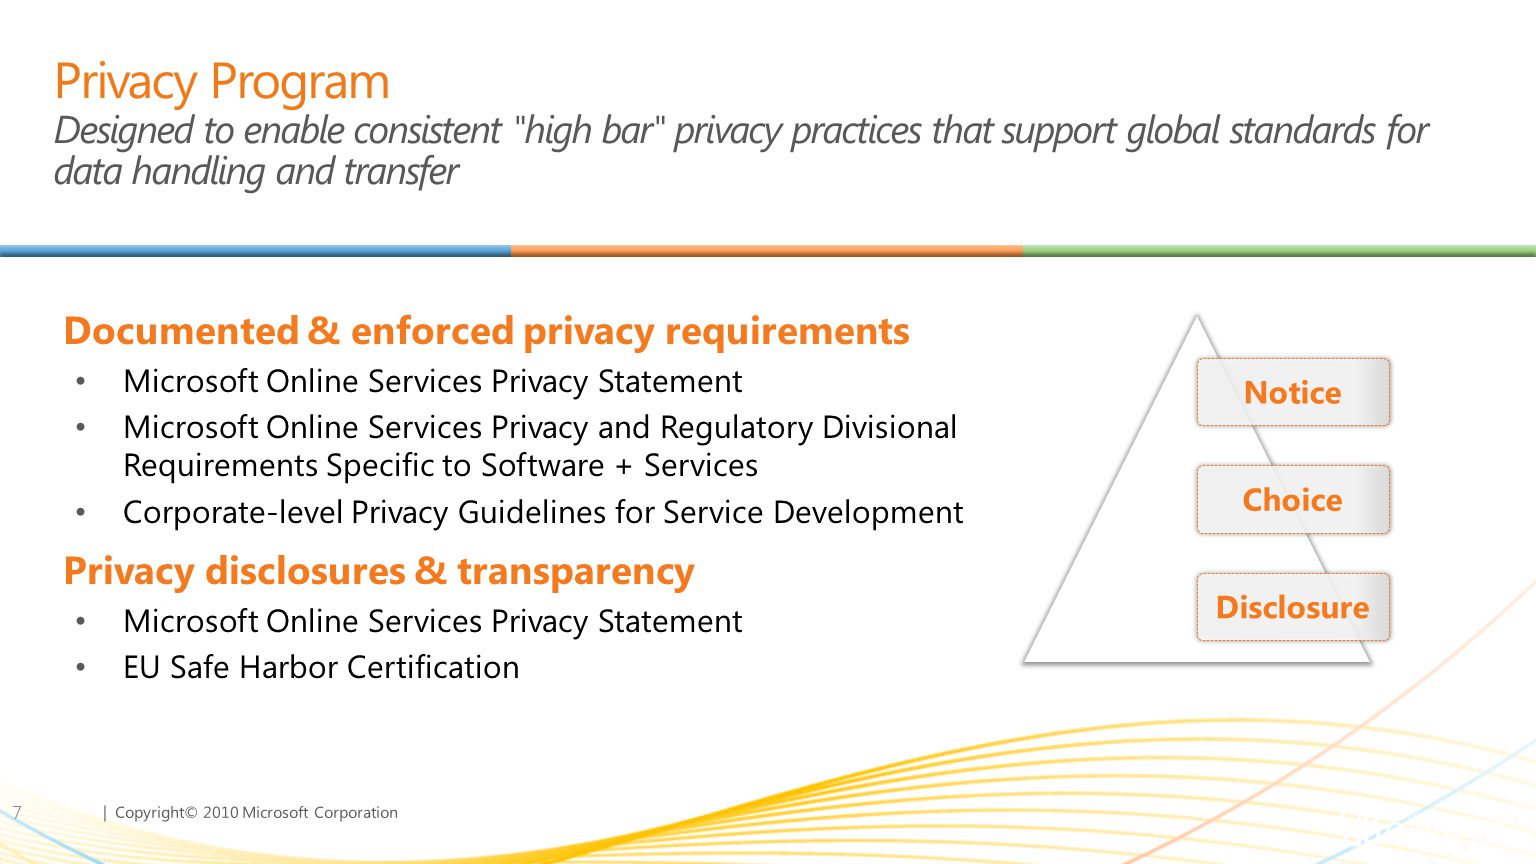 | Copyright© 2010 Microsoft Corporation Privacy Program Designed to enable consistent high bar privacy practices that support global standards for data handling and transfer 7